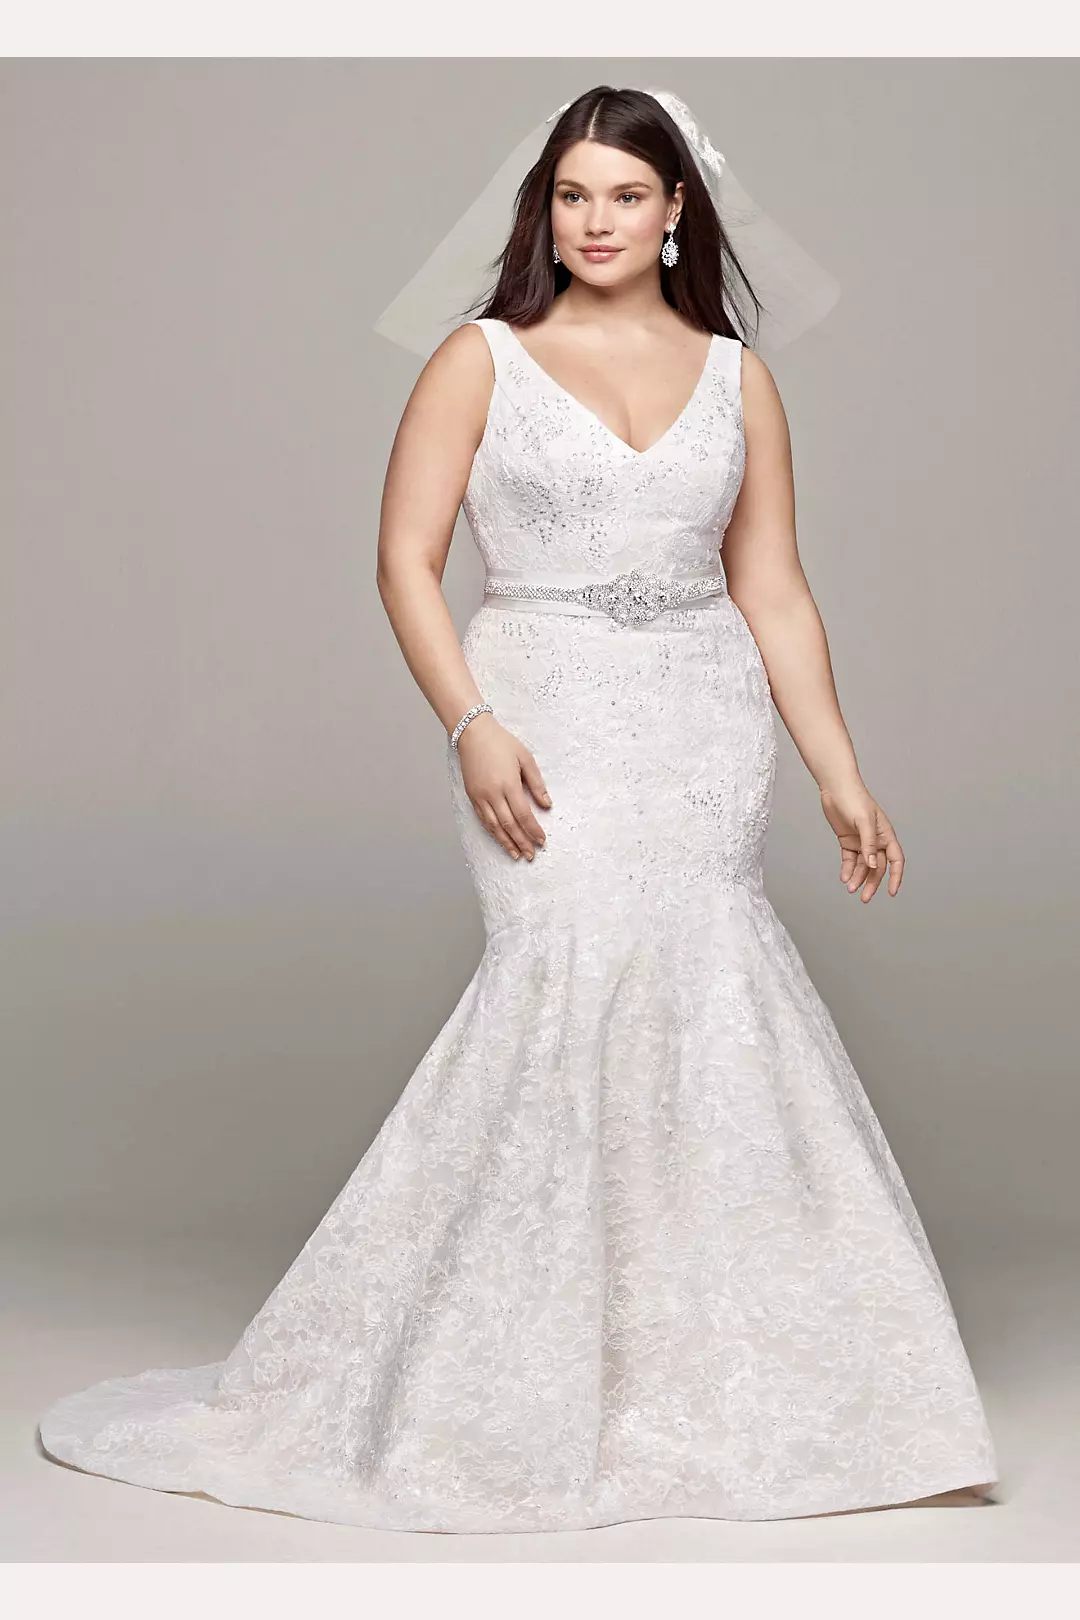 As-Is Lace and Deep V Neckline Wedding Dress  Image